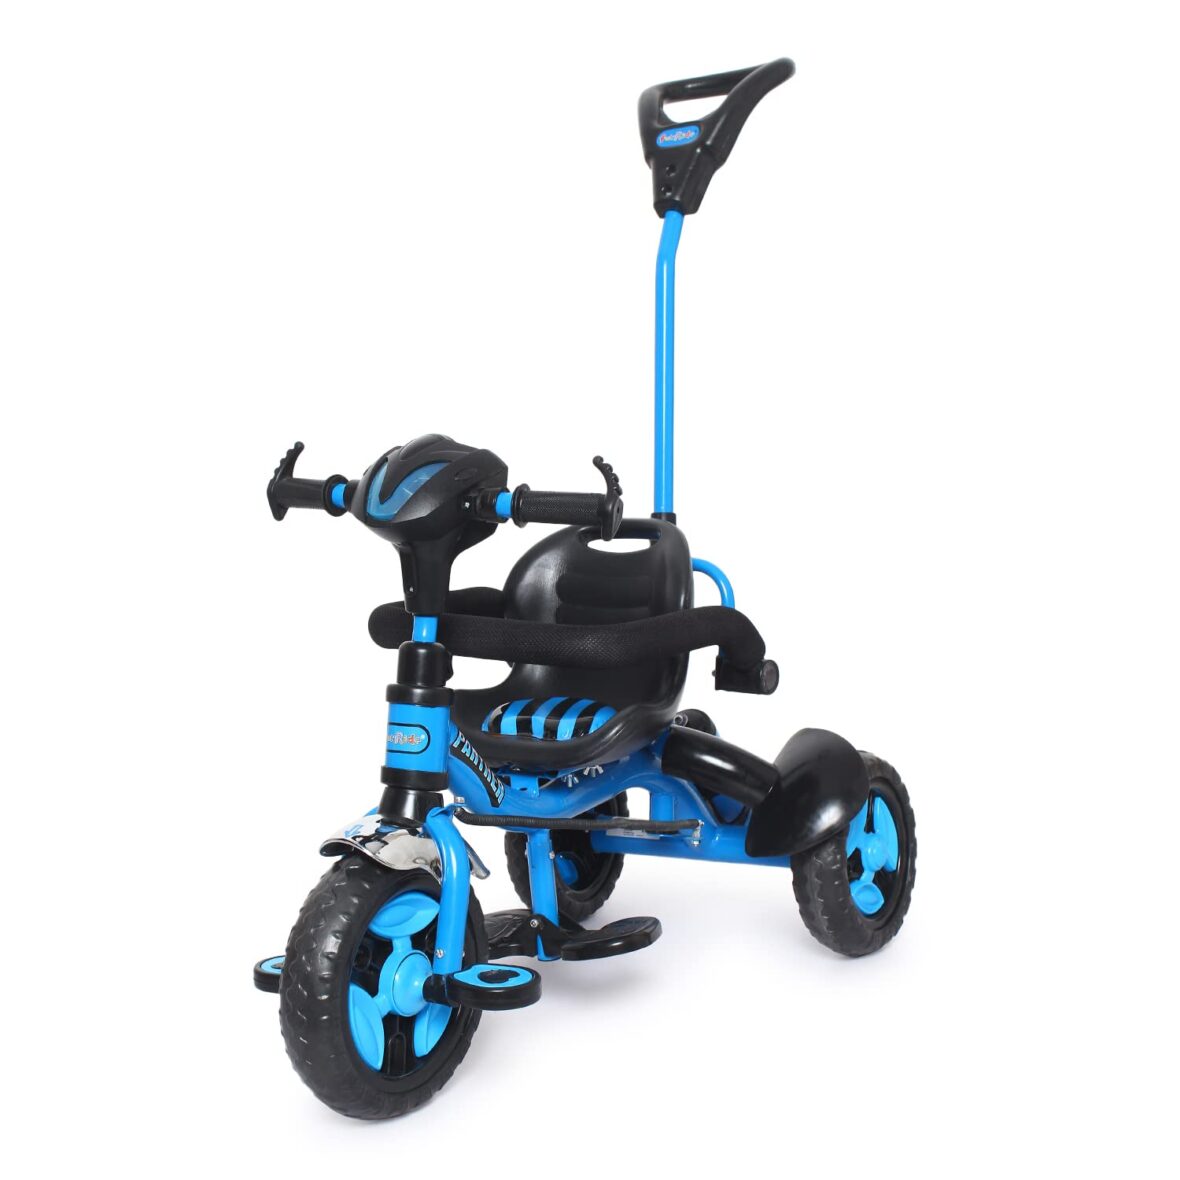 FunRide Kids Tricycle Rider Panther with Removable Parental Control Handle (16)